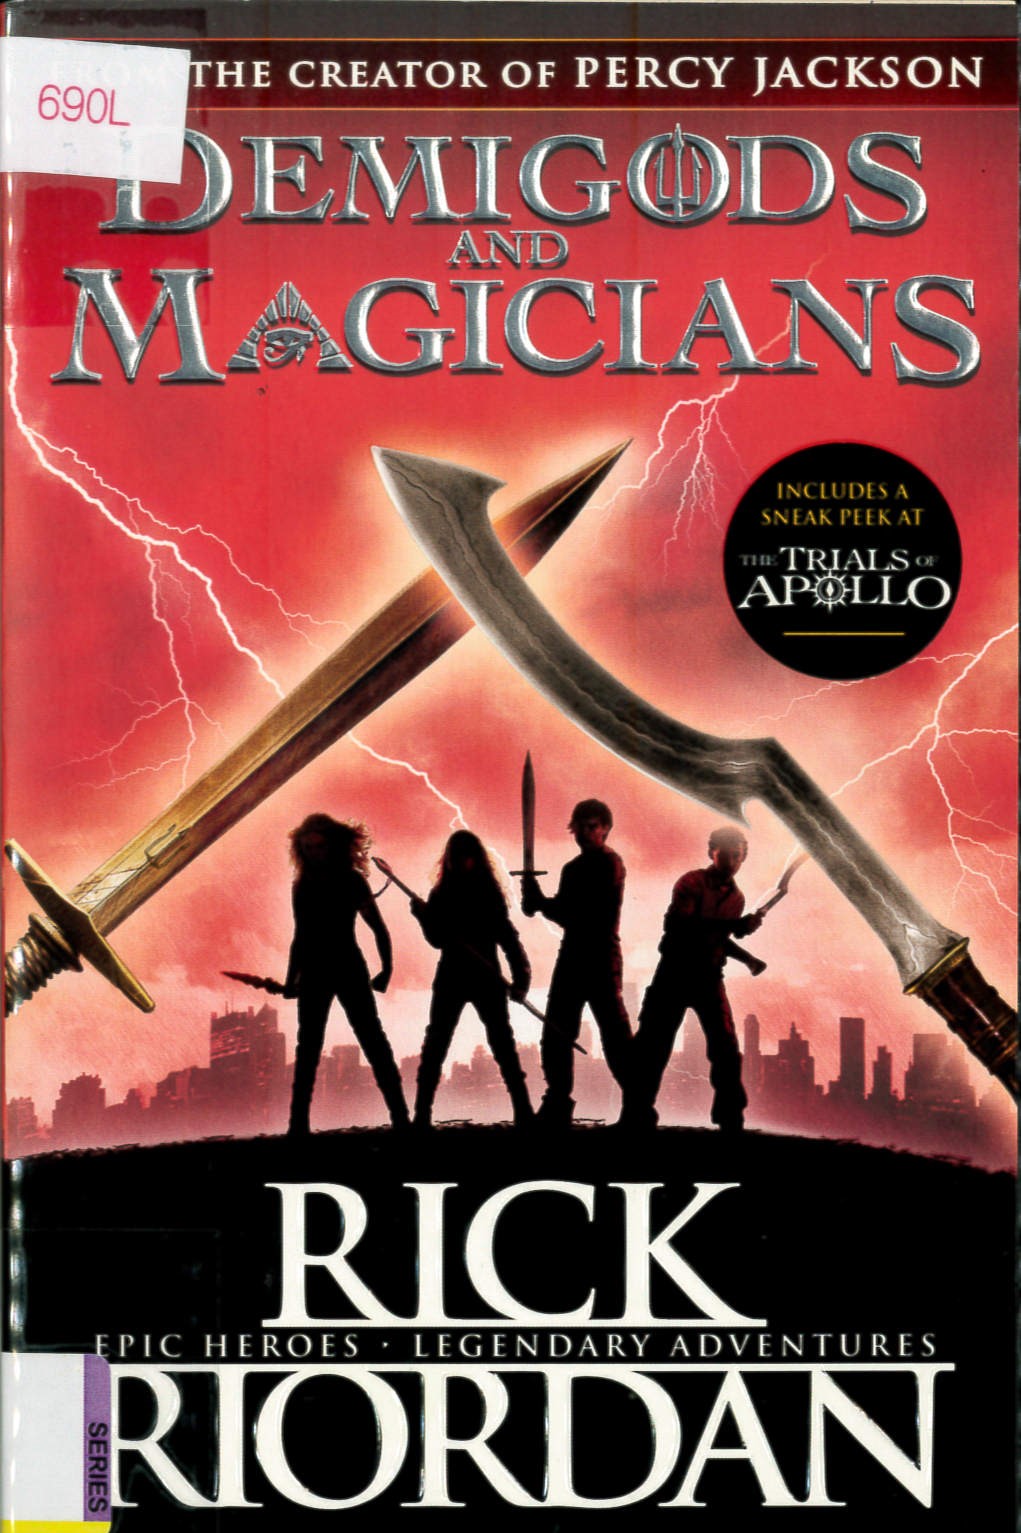 Demigods and magicians : three stories from the world of PercyJackson and the Kane Chronicles /